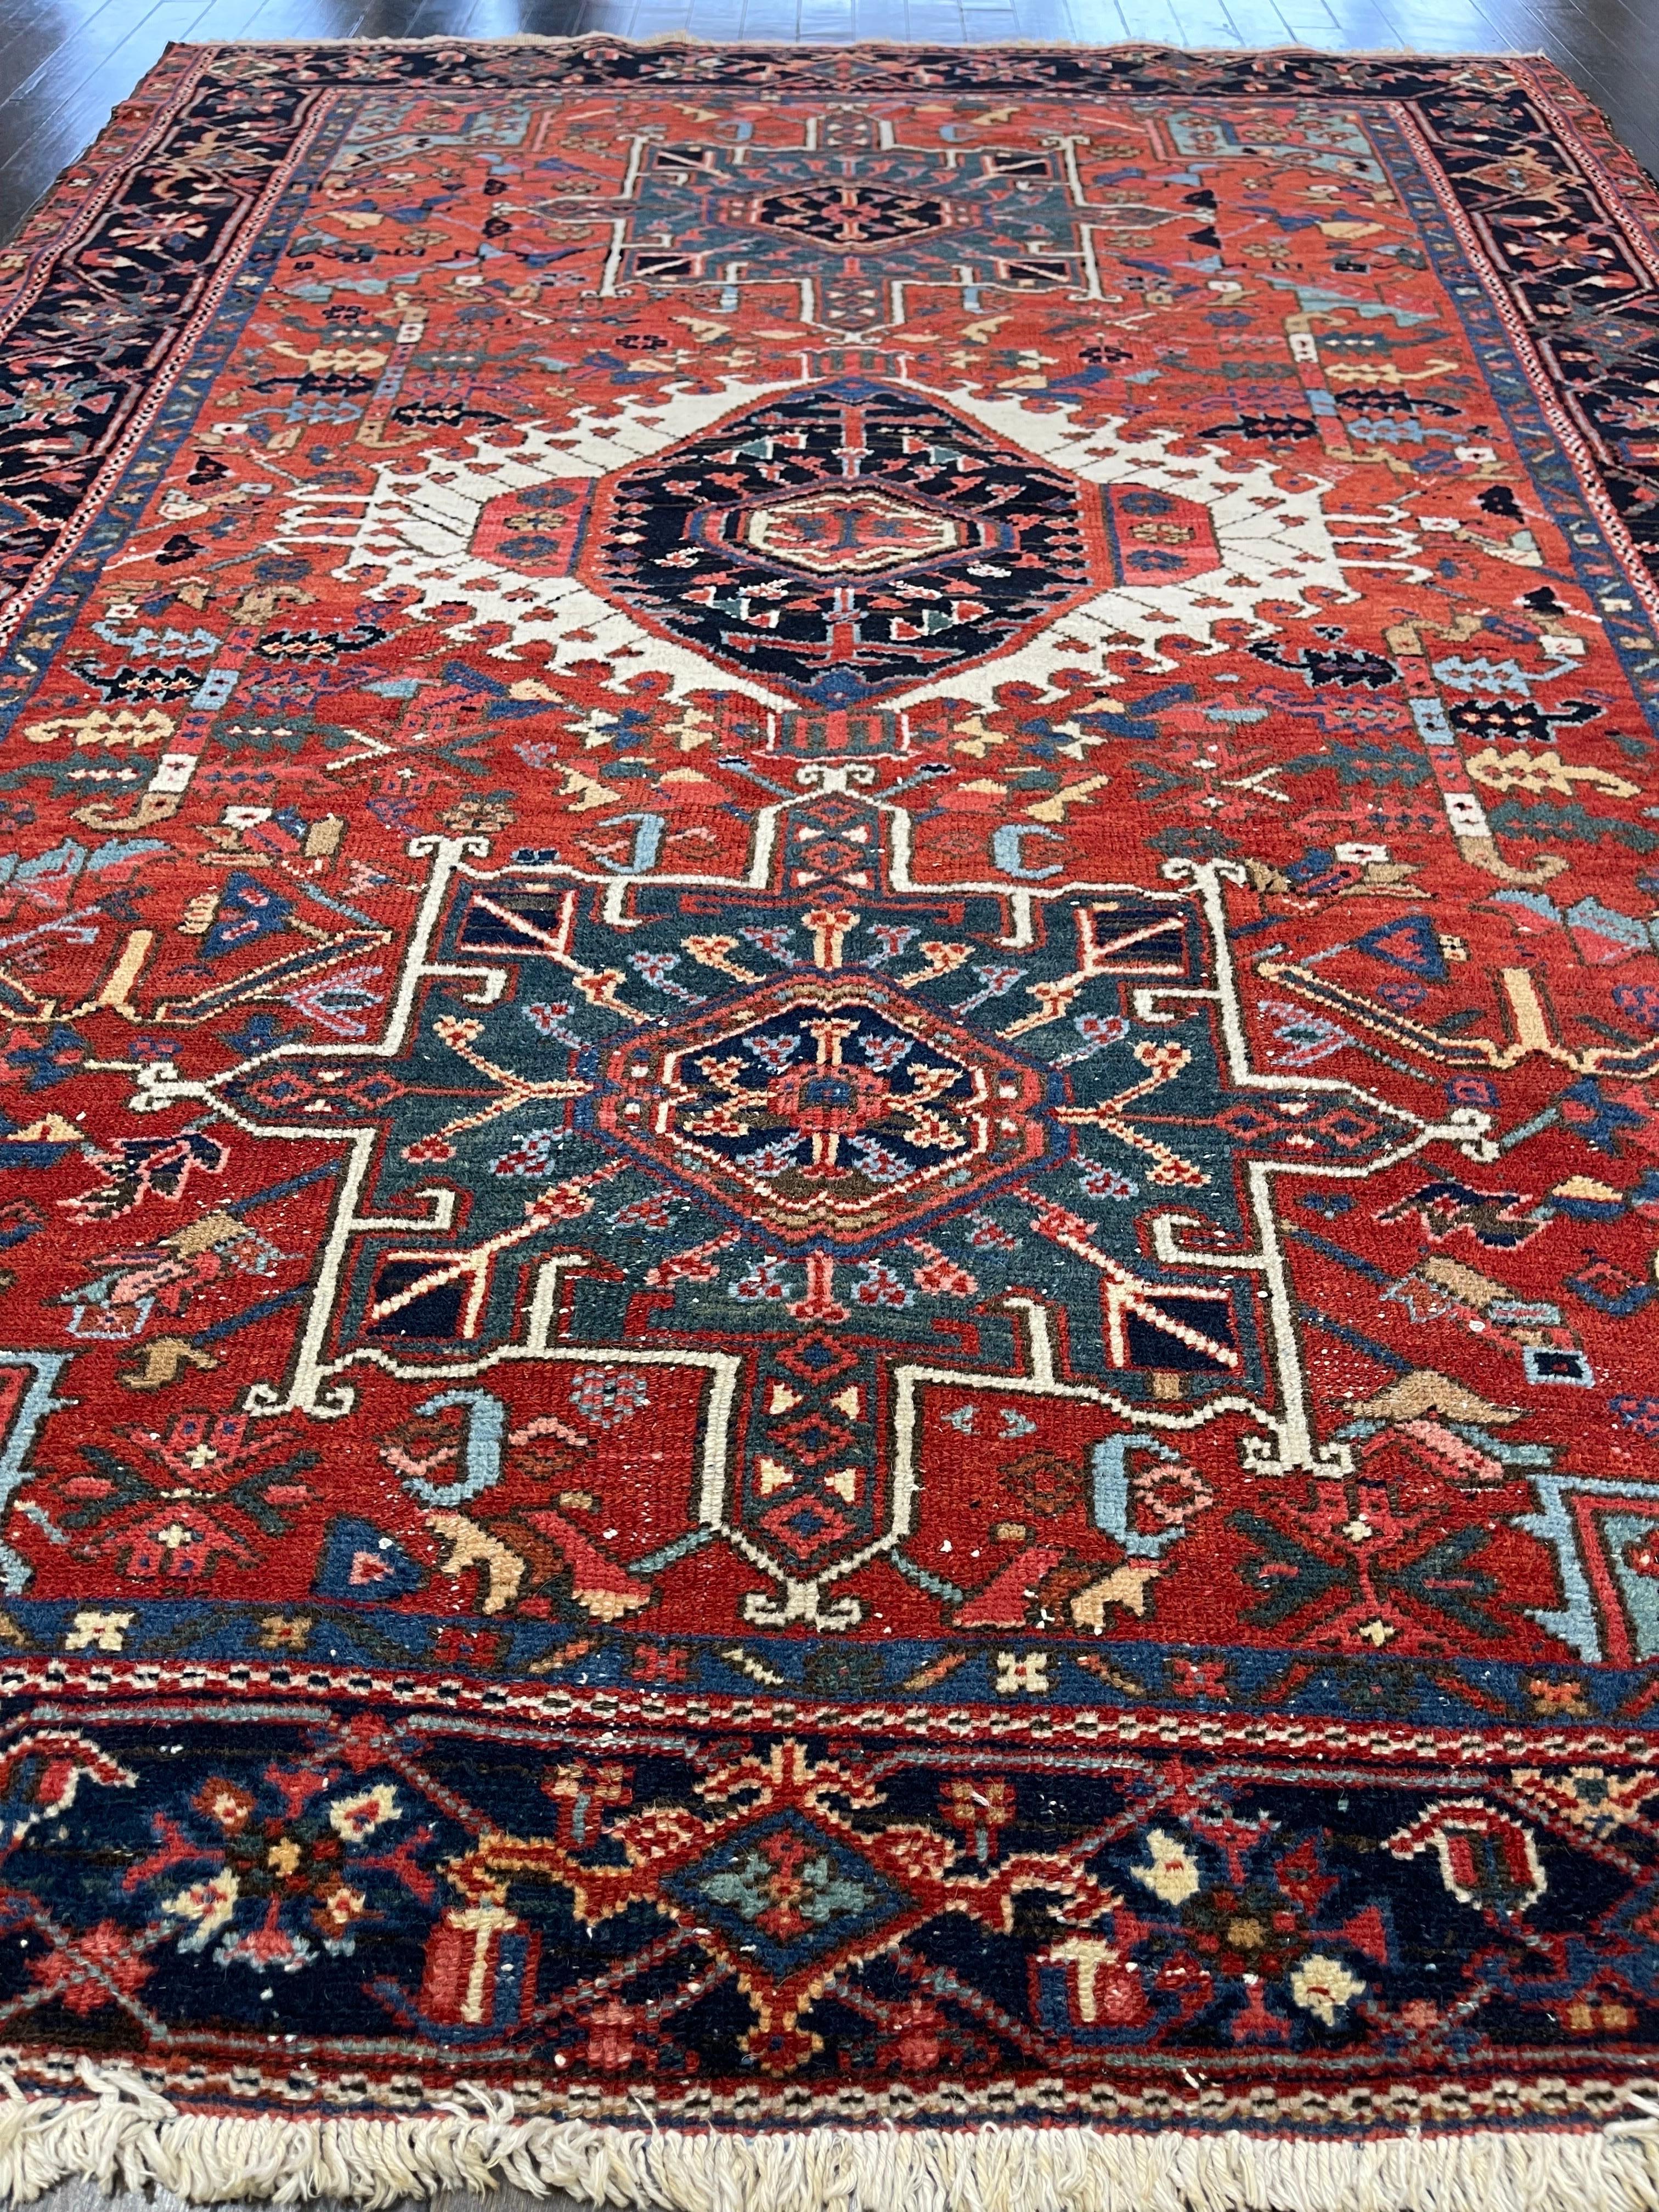 Hand knotted in wool, this carpet was made in the town of Heriz located northwest of Iran. Heriz carpet structure consists of a single cotton warp and double cotton weft using Turkish knots.

The rust/brown field is decorated with a medallion